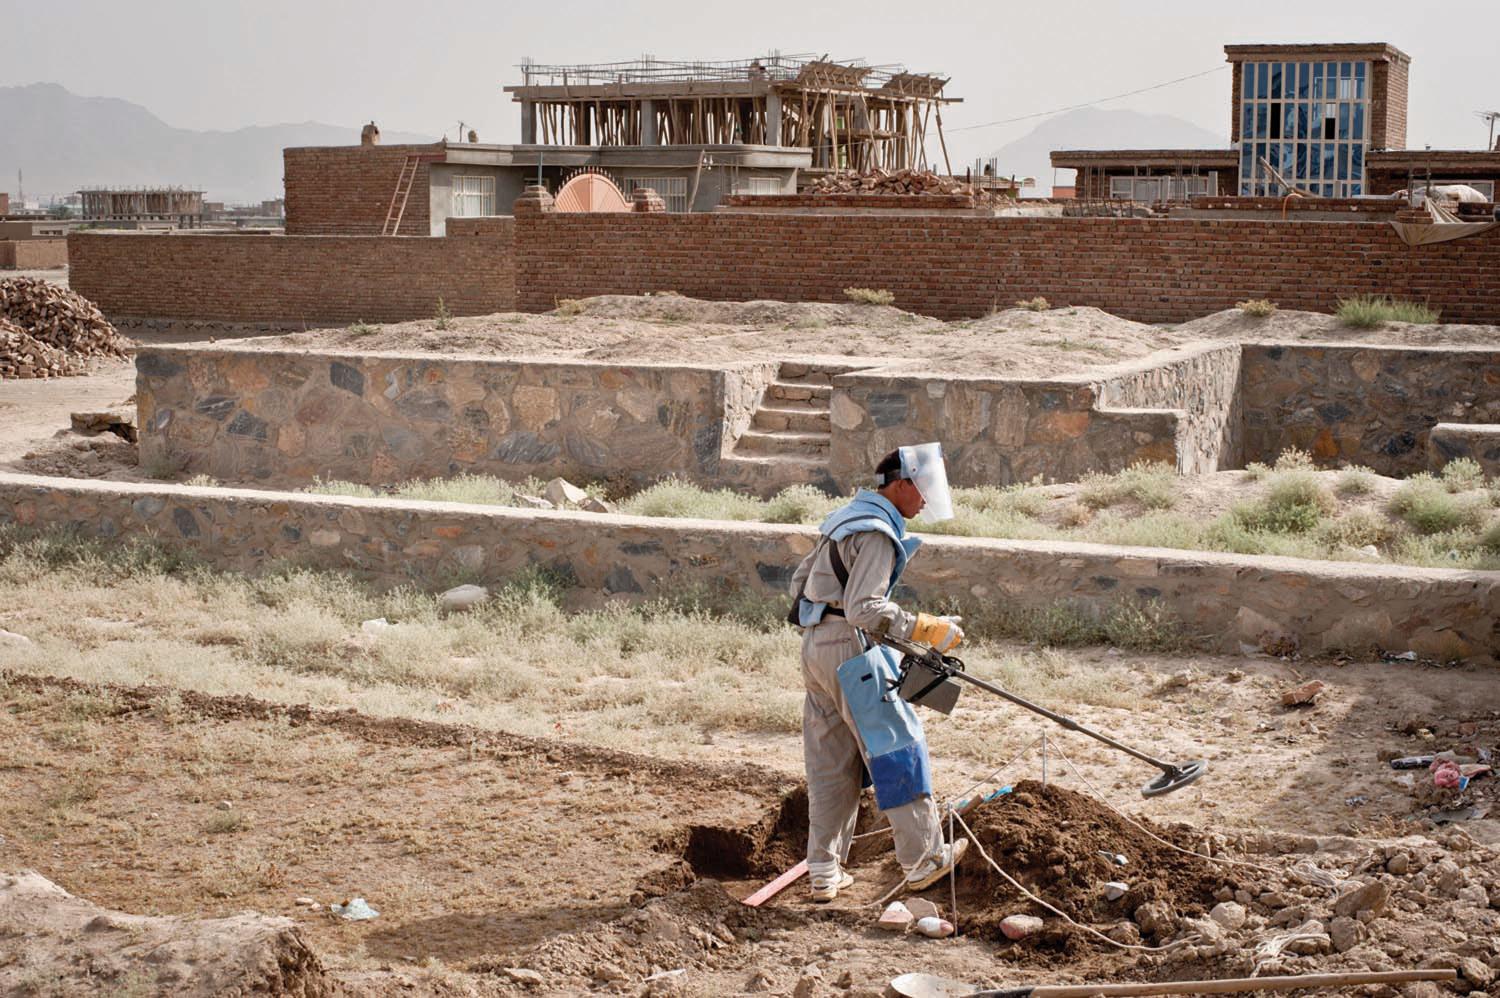 An Afghan de-miner painstakingly searches for landmines and unexploded ordnance in a new neighborhood next to Dar Ul Aman Palace. More than twenty years after the Soviet withdrawal, there are still over 100 minefields in the greater Kabul area, which was the most heavily mined region during the Soviet occupation and the ensuing civil war. Over 400 Afghans—mostly children—are still wounded each year by landmines and explosive remnants of war. De-mining programs employ 14,000 Afghans and cost the internationa